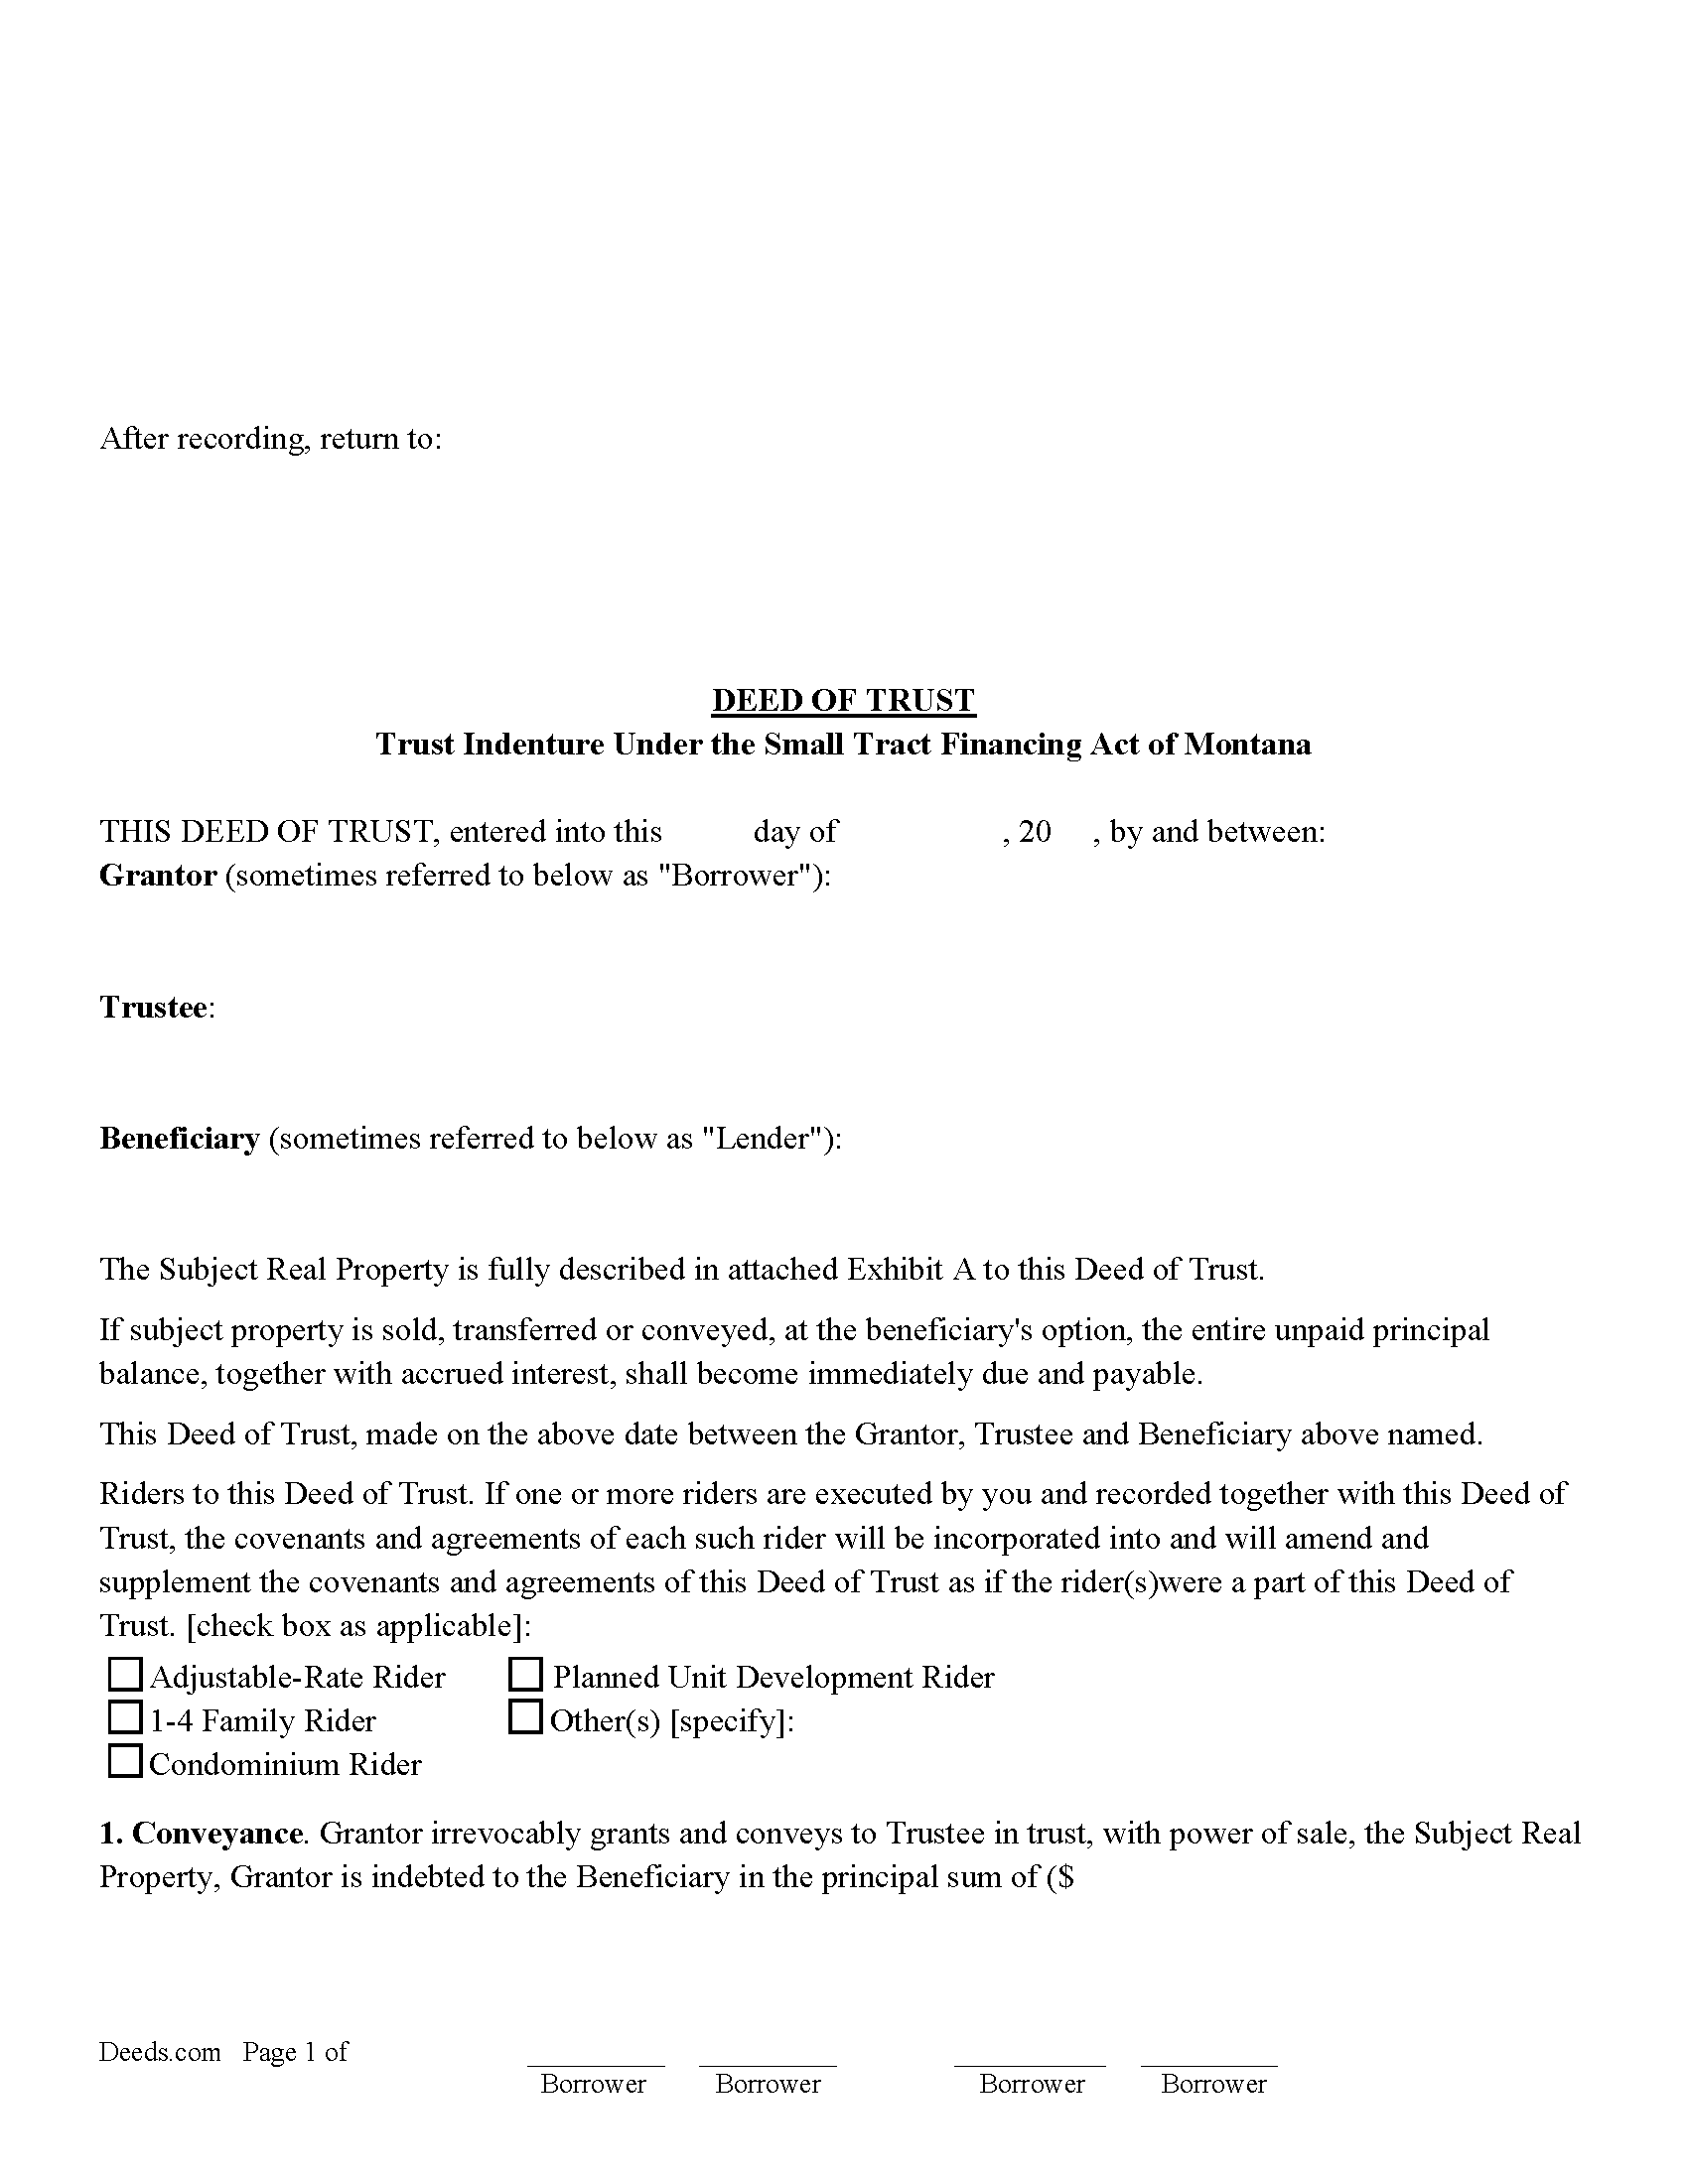 Deed of Trust and Promissory Note